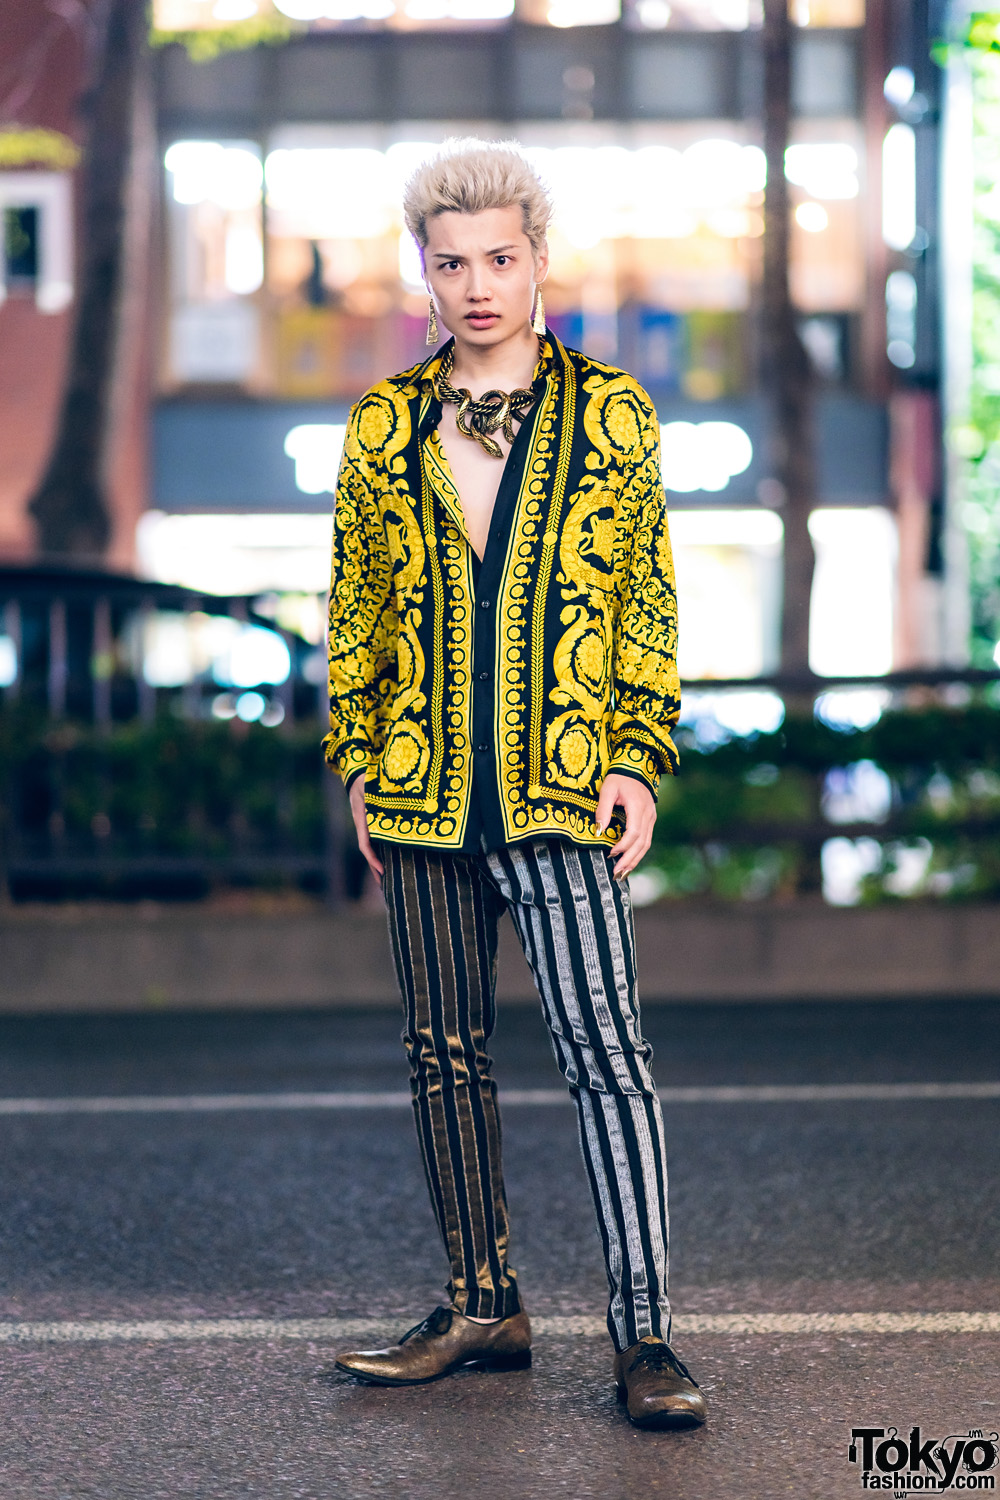 Japanese Mens Street Style in Harajuku w/ Roberto Cavalli Snake Statement Necklace, Versace Baroque Print Shirt, Striped Pants & Haider Ackermann Loafers